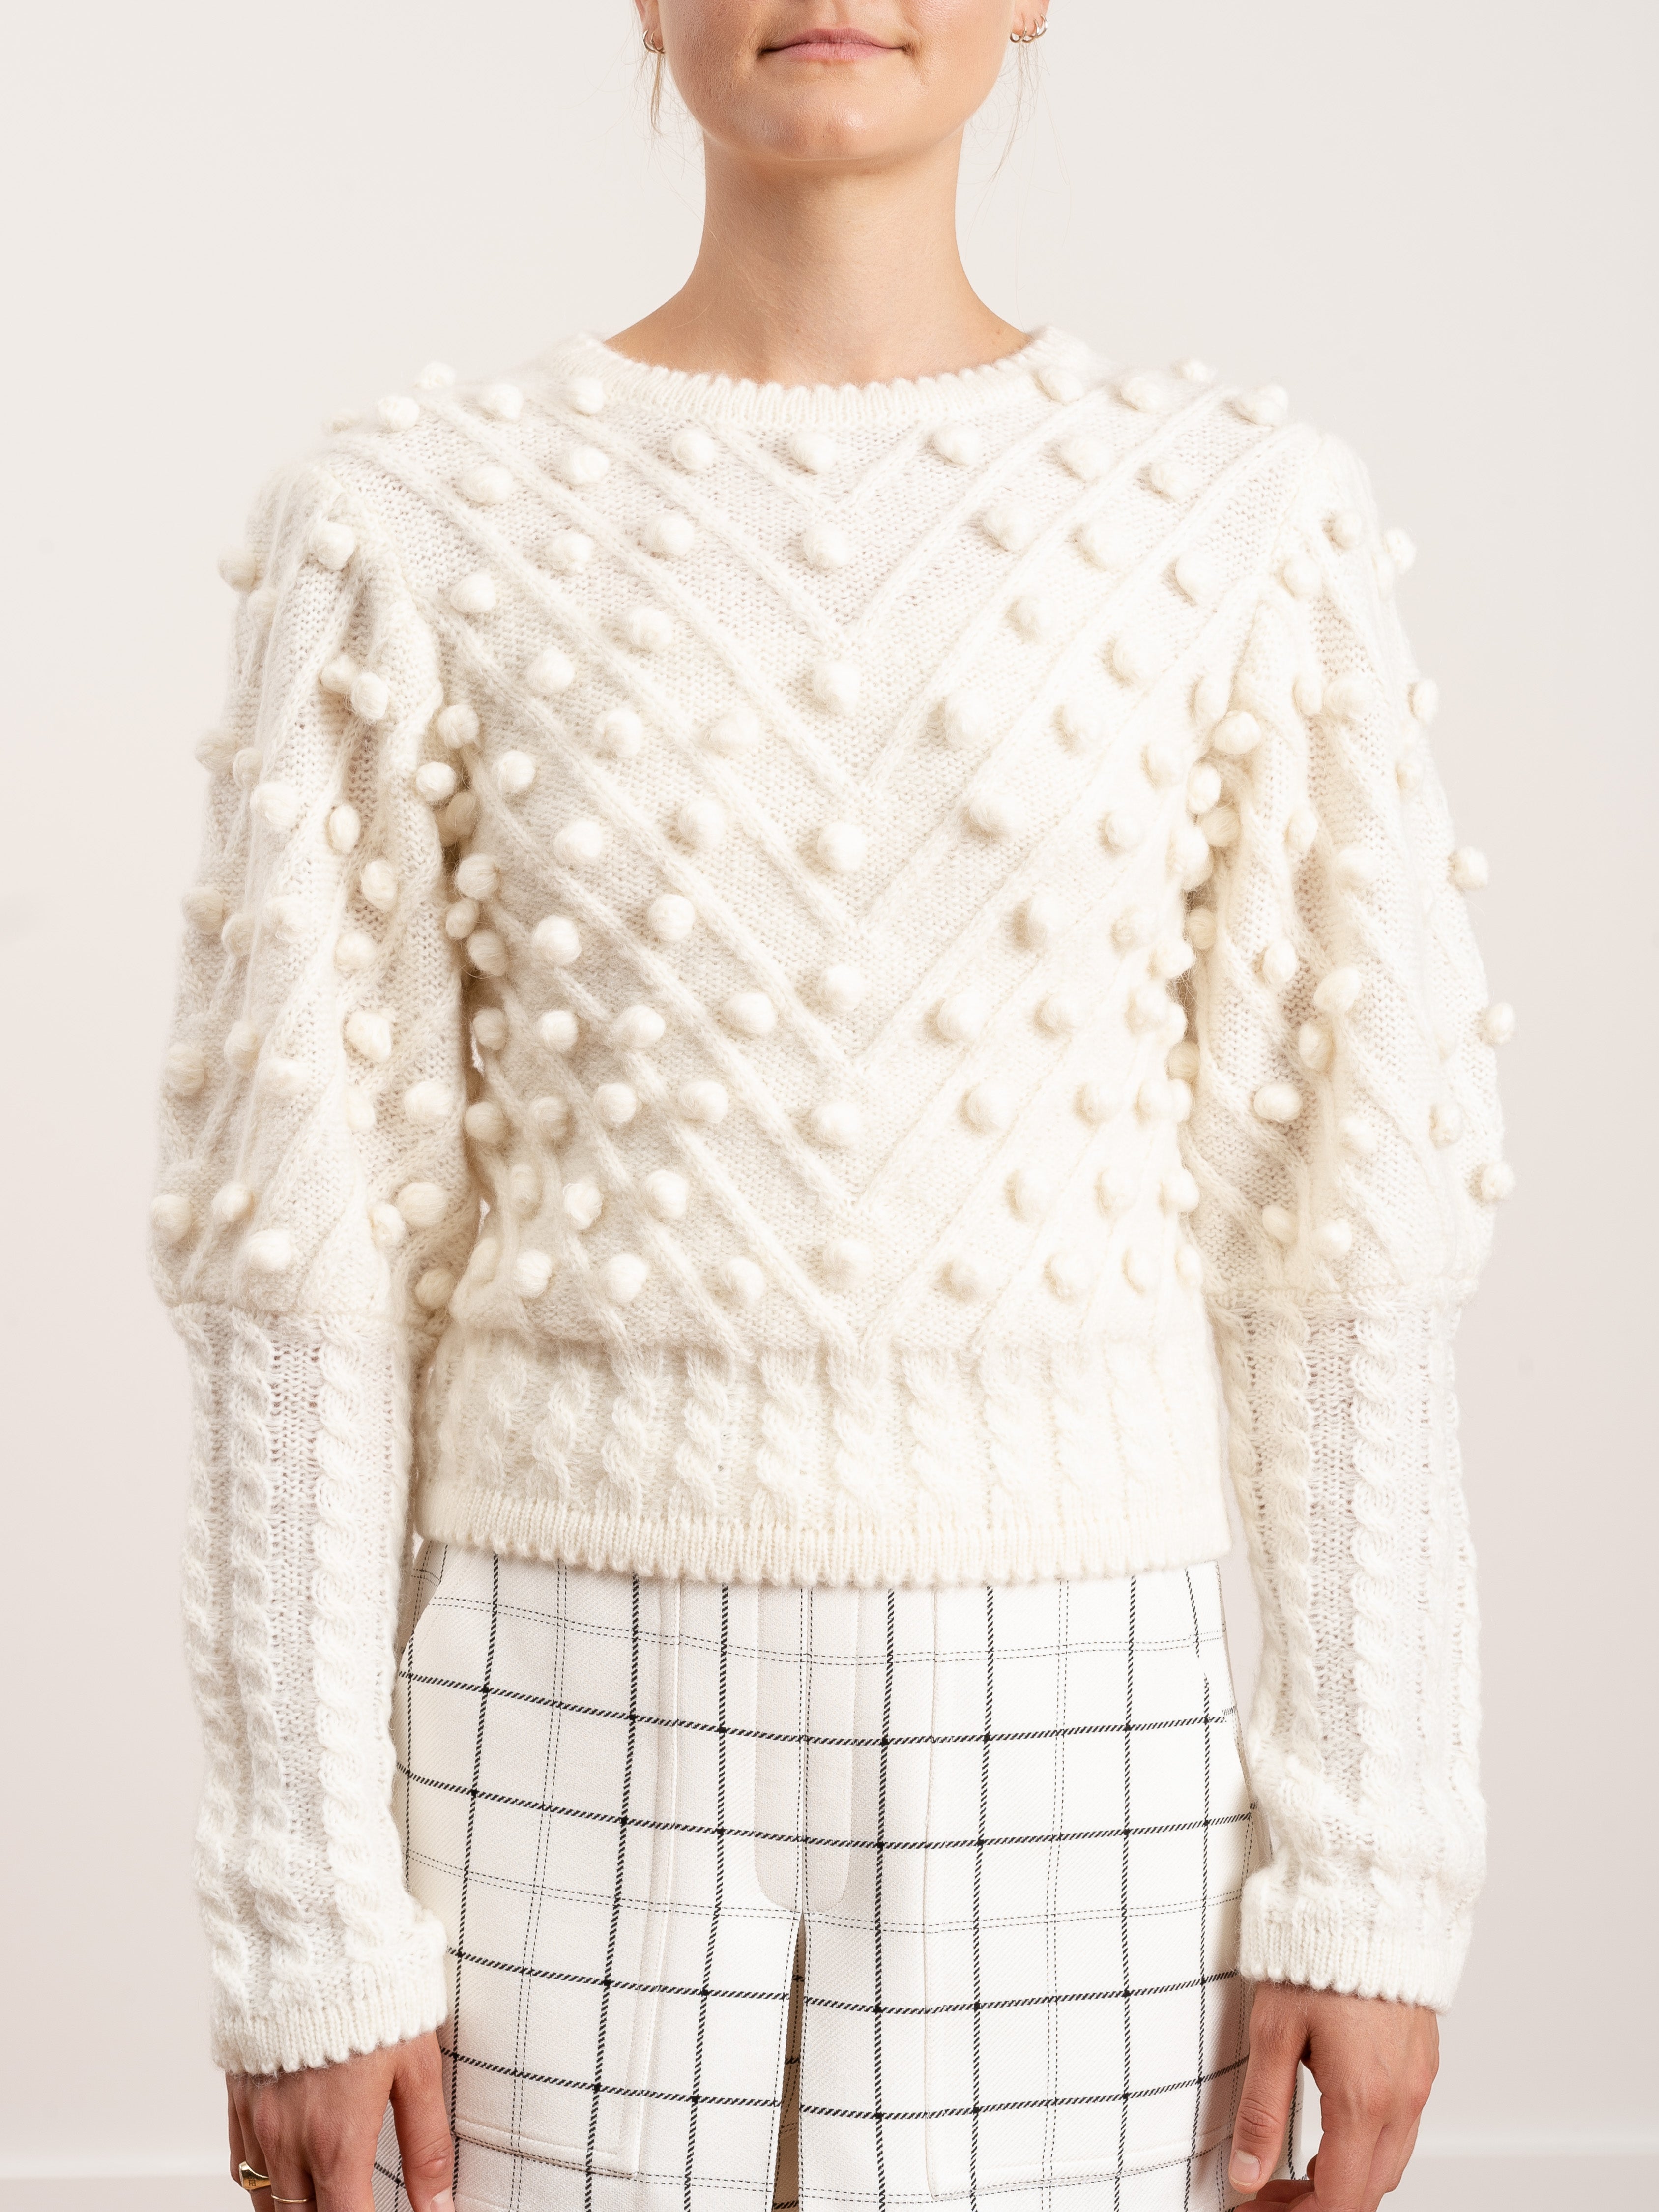 Hotel Particulier Popcorn Pullover Sweater Ivory – scarpa